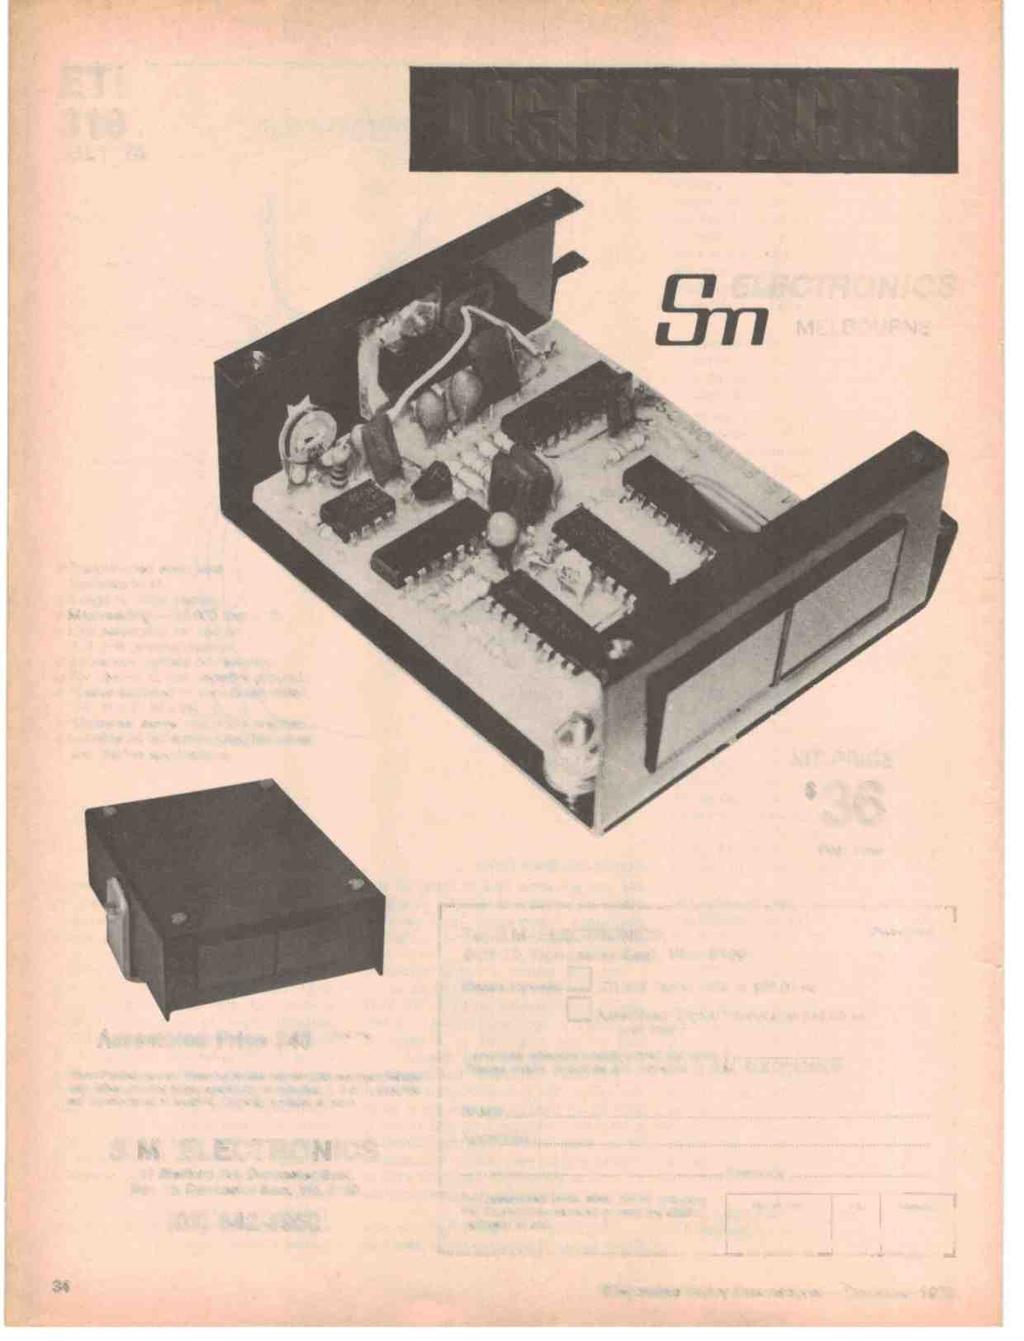 . ETI 318 JULY '78 DIGITAL TACHO,ELECTRONICS MELBOURNE ti r { Fr,,! 1 r...,,.] ::::.'-.,,.a a 311, Pre -punched steel case included in kit. 4 digit t/º" high display., Max reading - 10,000 rpm x 10.